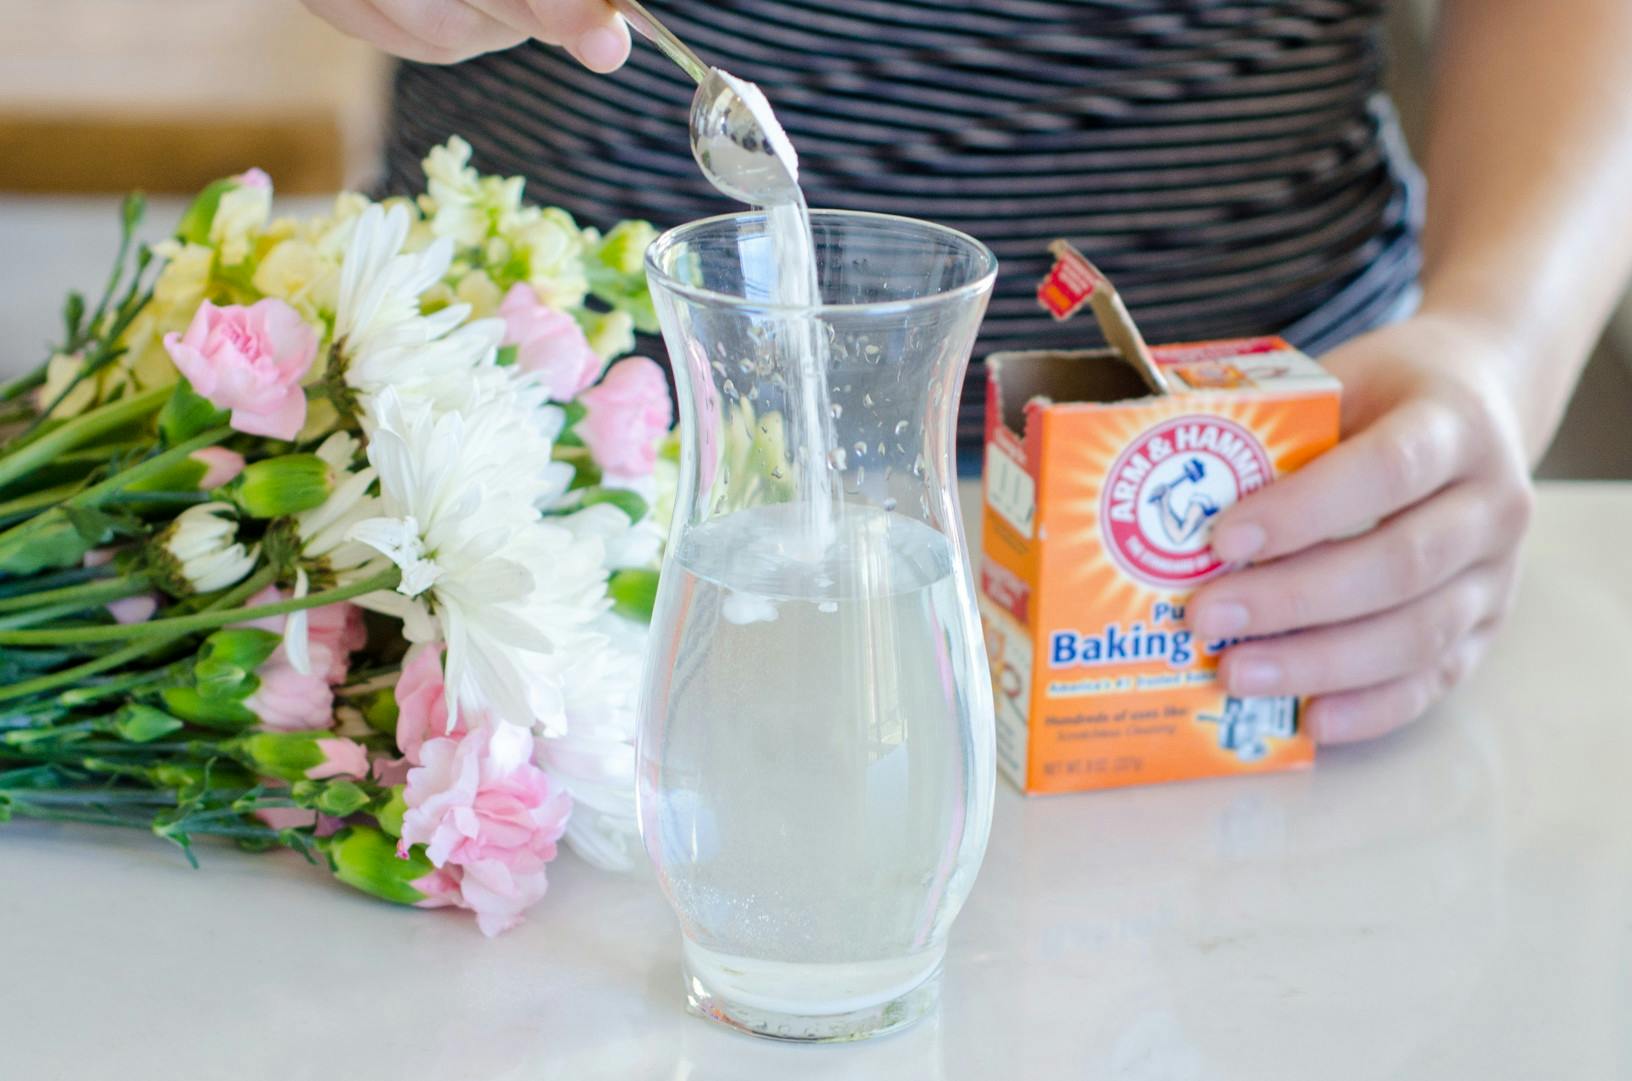 Keep flowers alive longer by adding one teaspoon of baking soda to the vase.